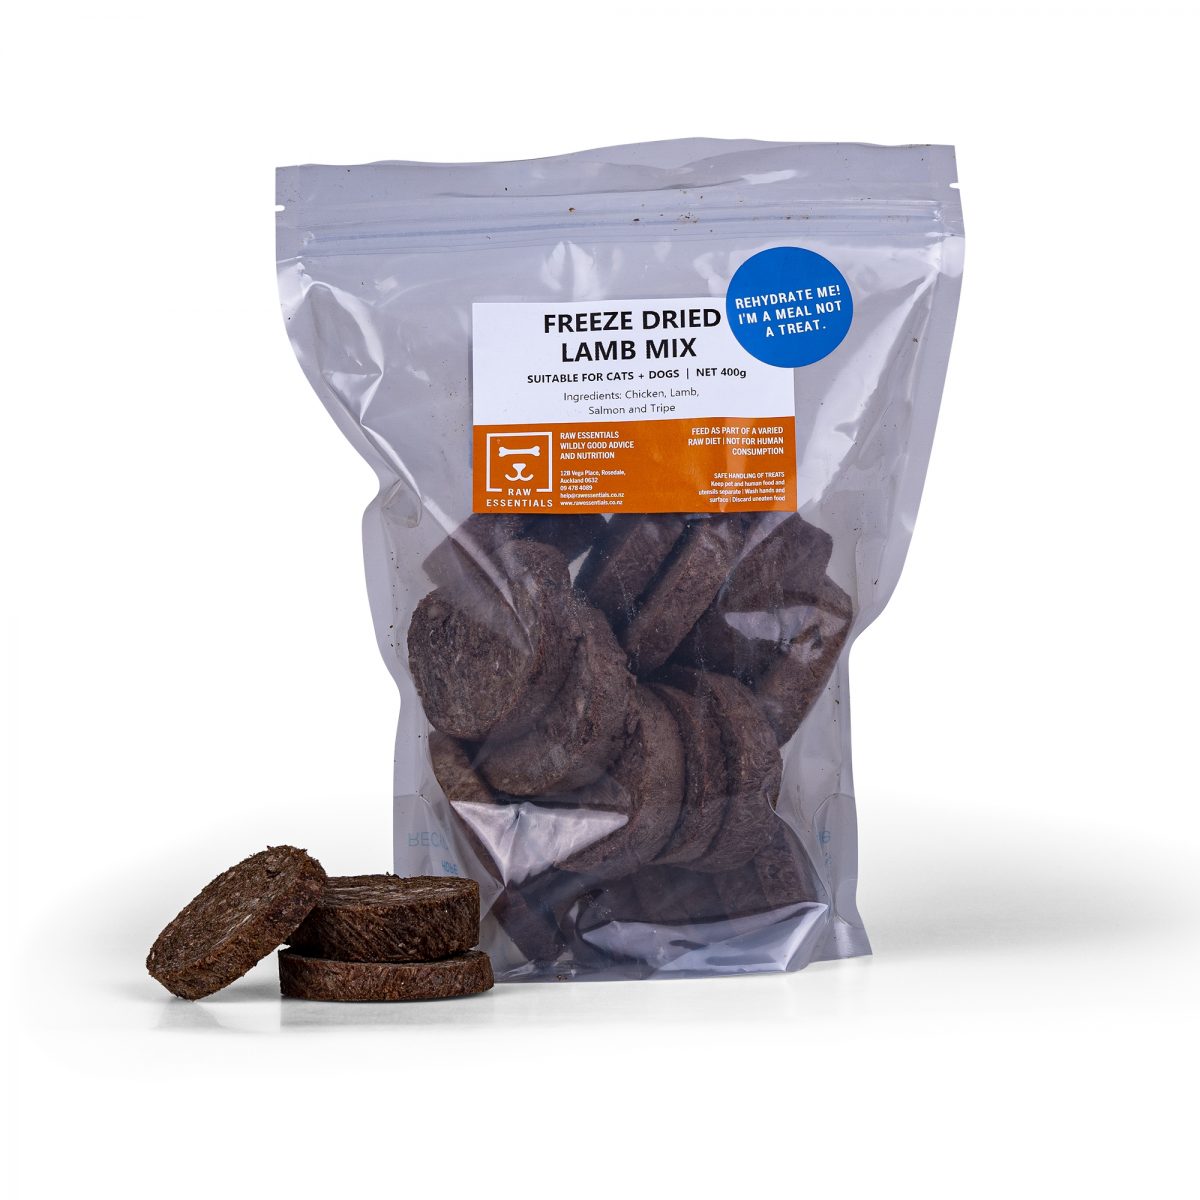 400g Plastic Pack Of Freeze Dried Lamb Mix For Pets With Product Shown Outside of Packet